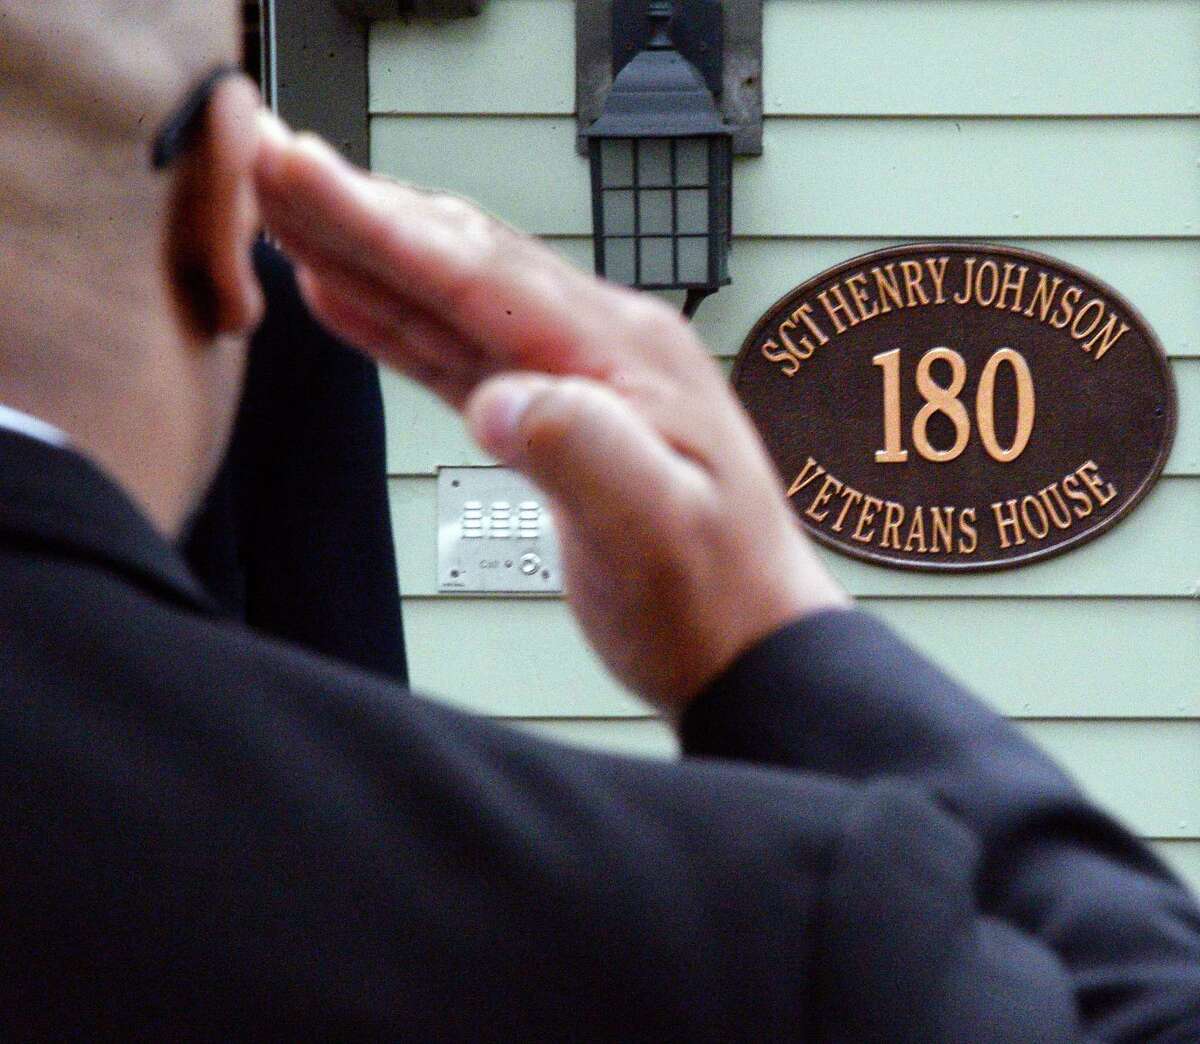 Albany Housing Coalition?•s Veterans House is rededicated as the Sgt. Henry Johnson Veterans House during the 2nd Annual Henry Johnson Day observance Tuesday June 5, 2018 in Albany, NY. (John Carl D'Annibale/Times Union)